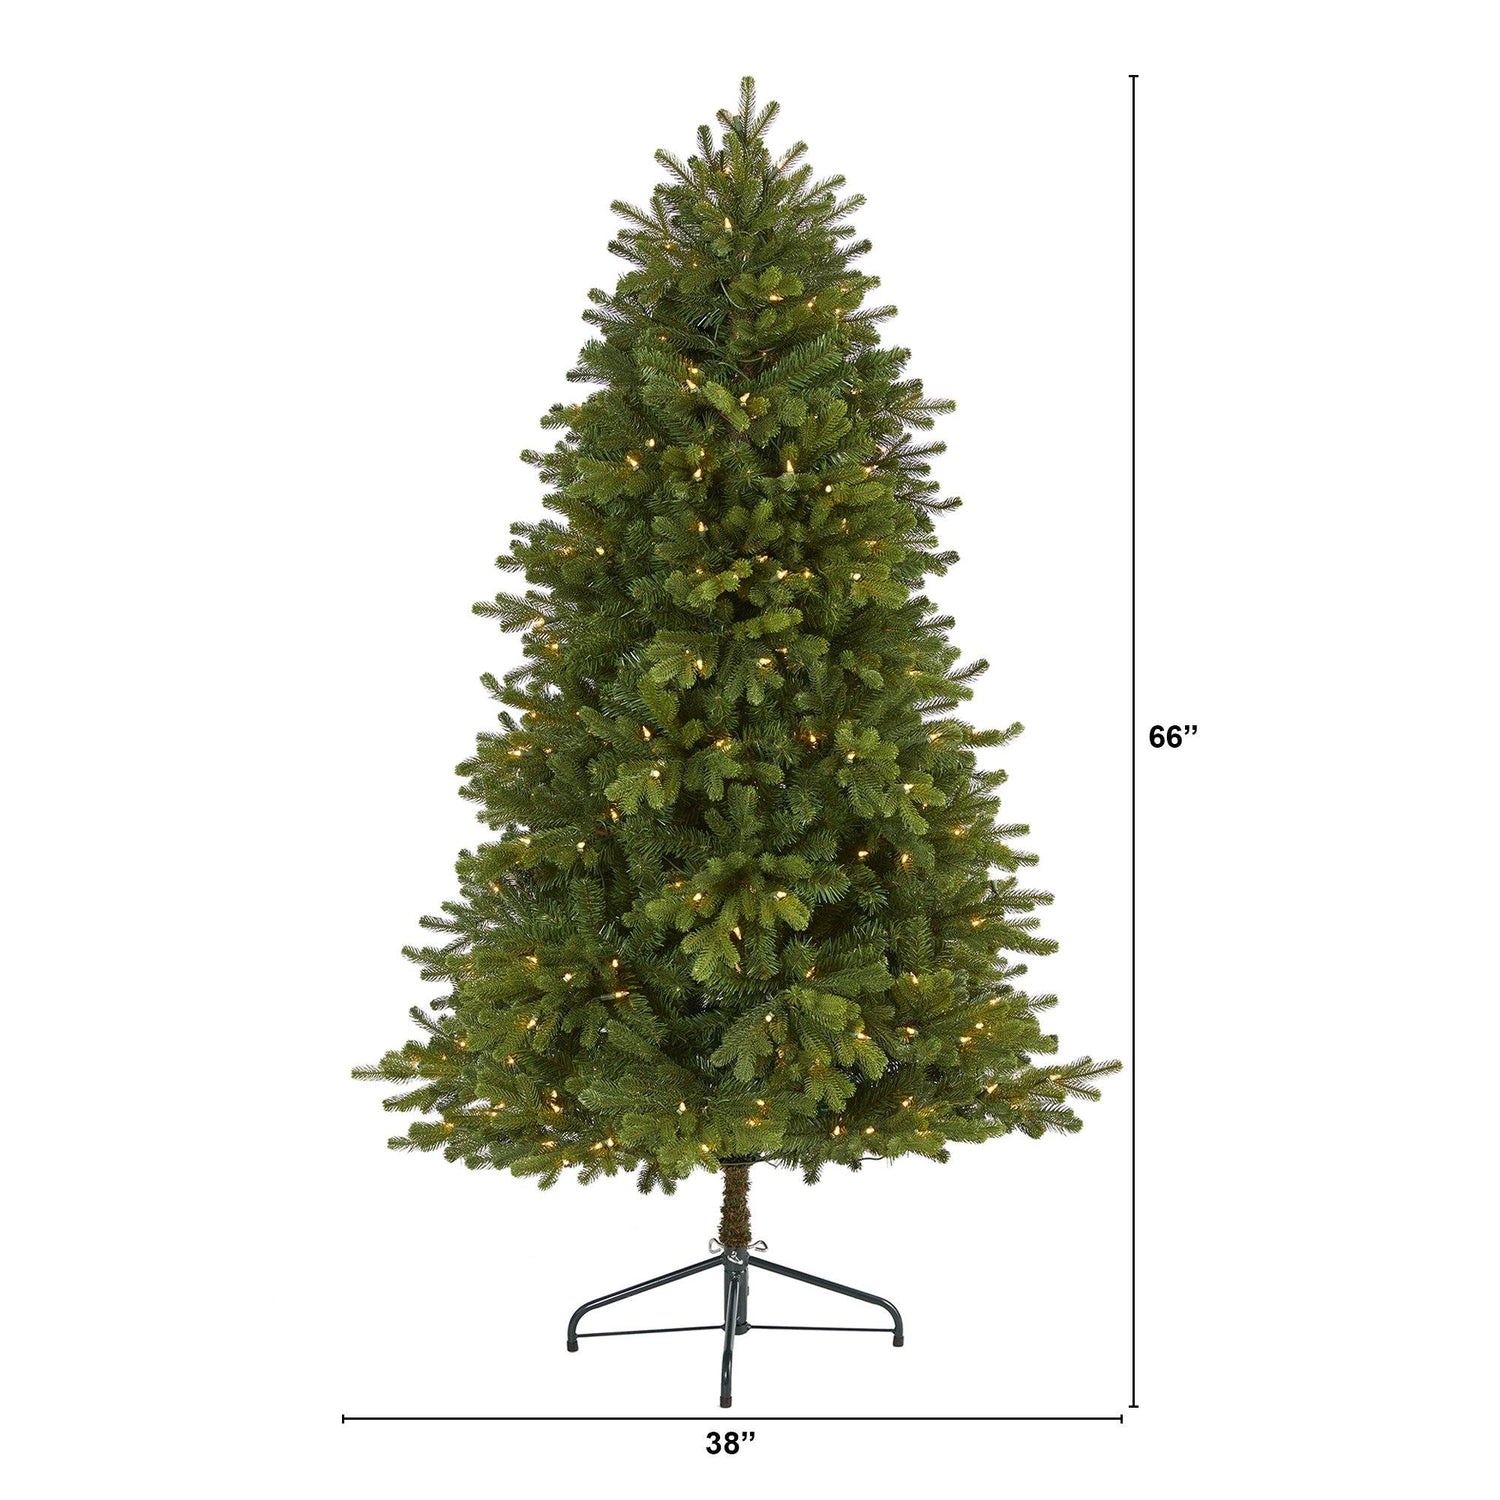 5.5’ Washington Fir Artificial Christmas Tree with 300 Clear Lights and 672 Bendable Branches